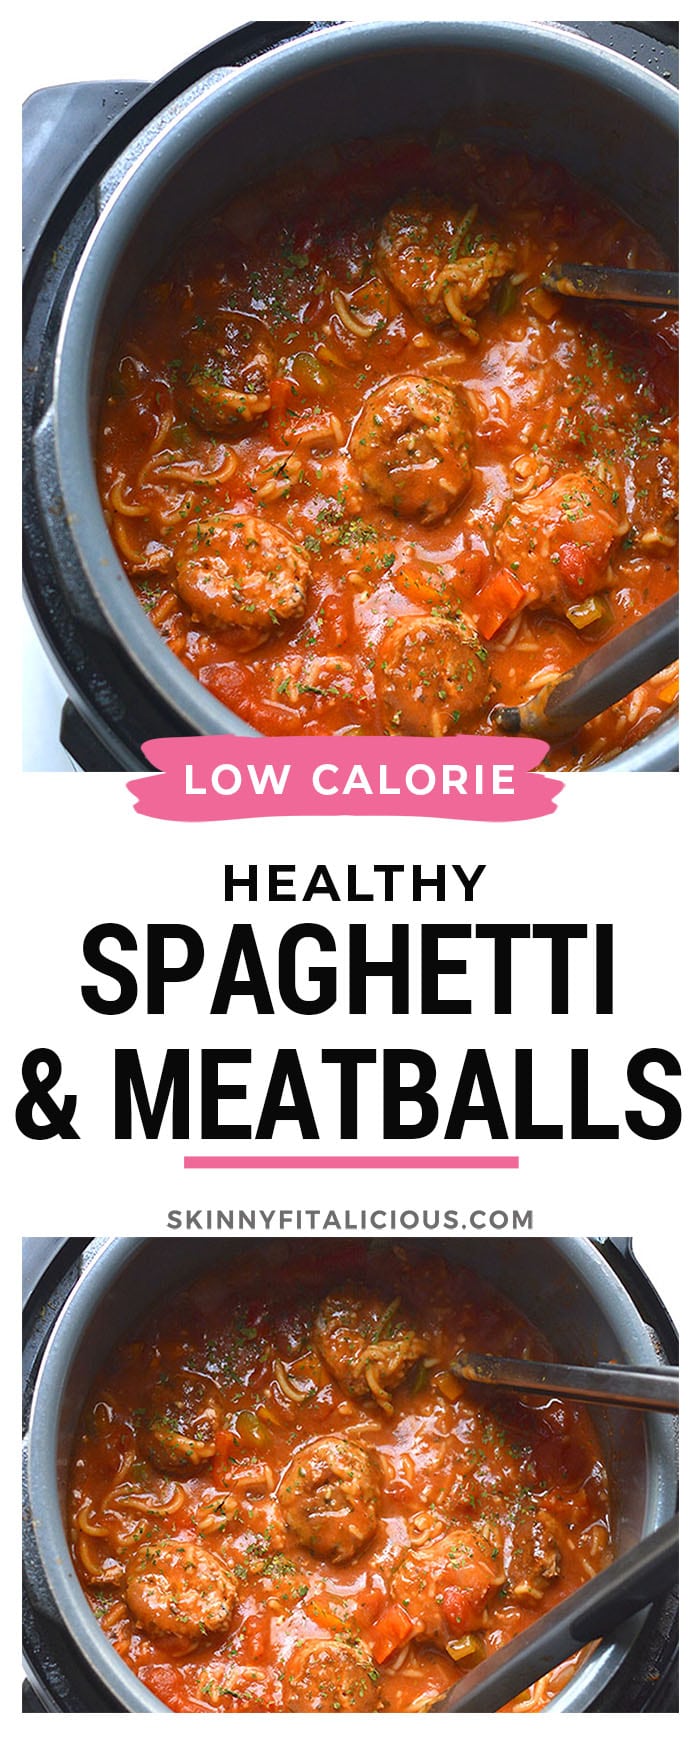 Instant Pot Spaghetti and Meatballs! A delicious one pot meal with chicken meatballs and a homemade tomato sauce. A lighter and healthier meal made in a pressure cooker with gluten free chickpea spaghetti.